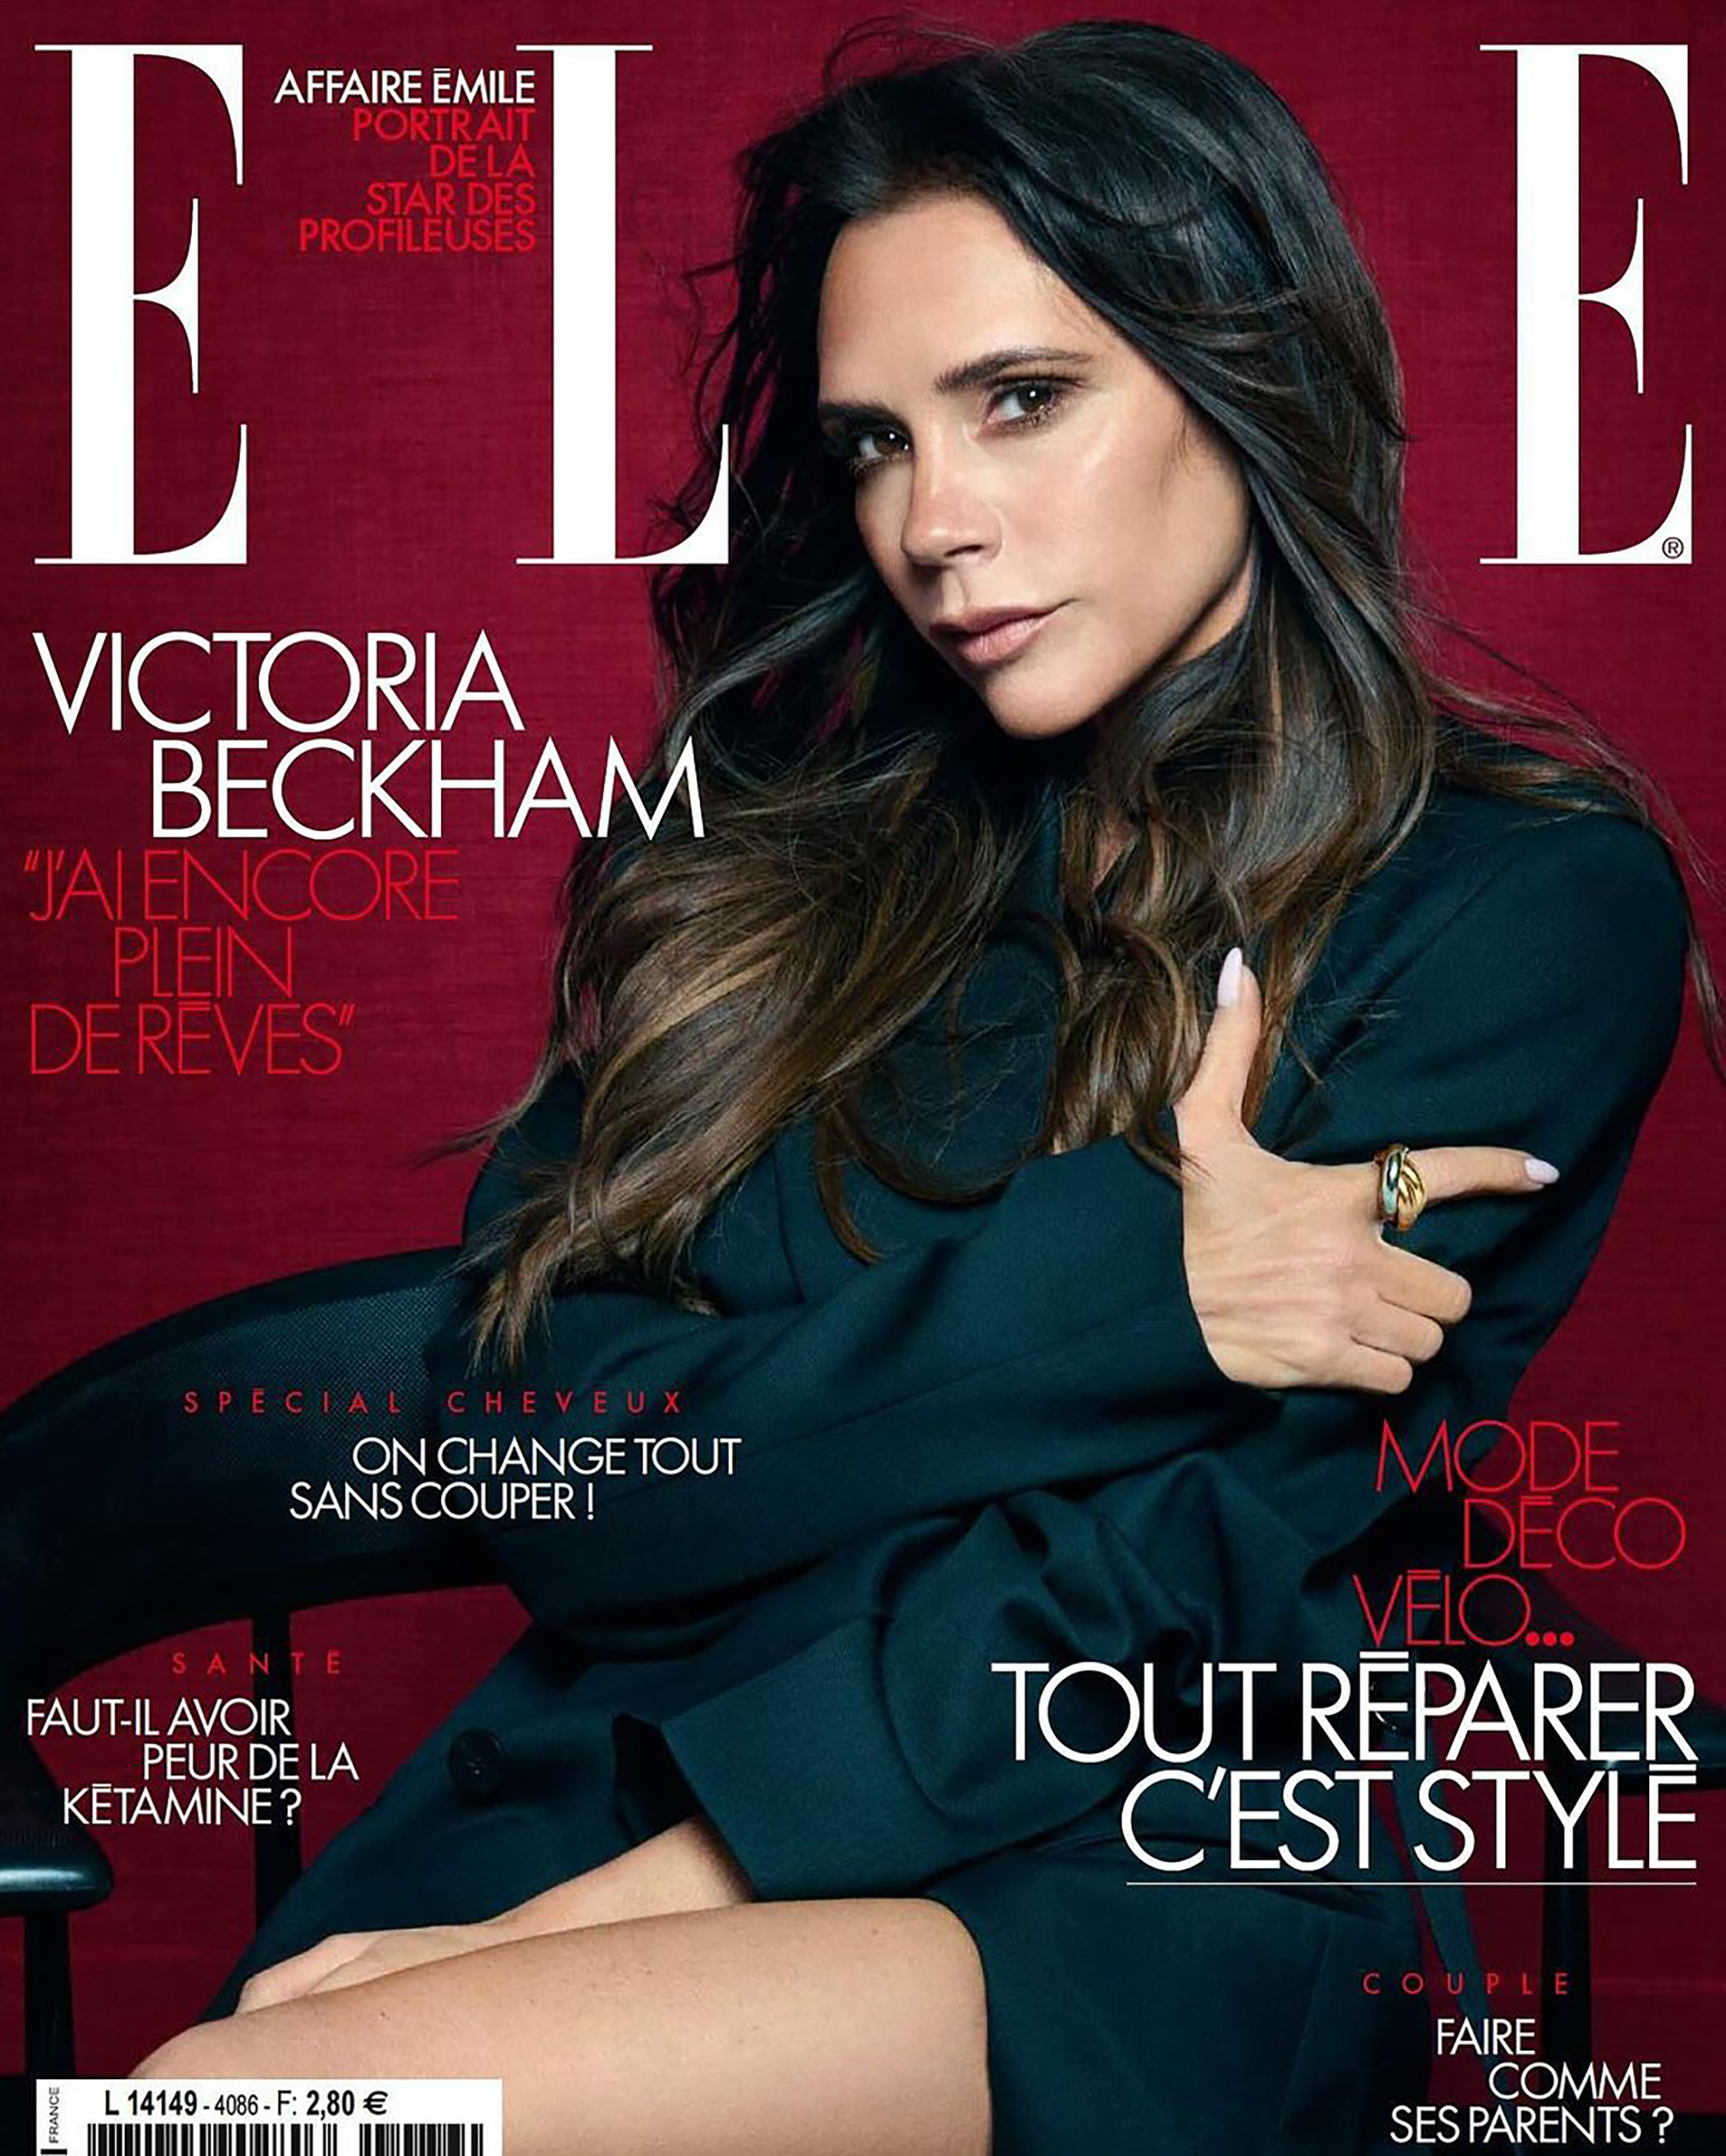 Victoria on the cover of the Elle Spain mag